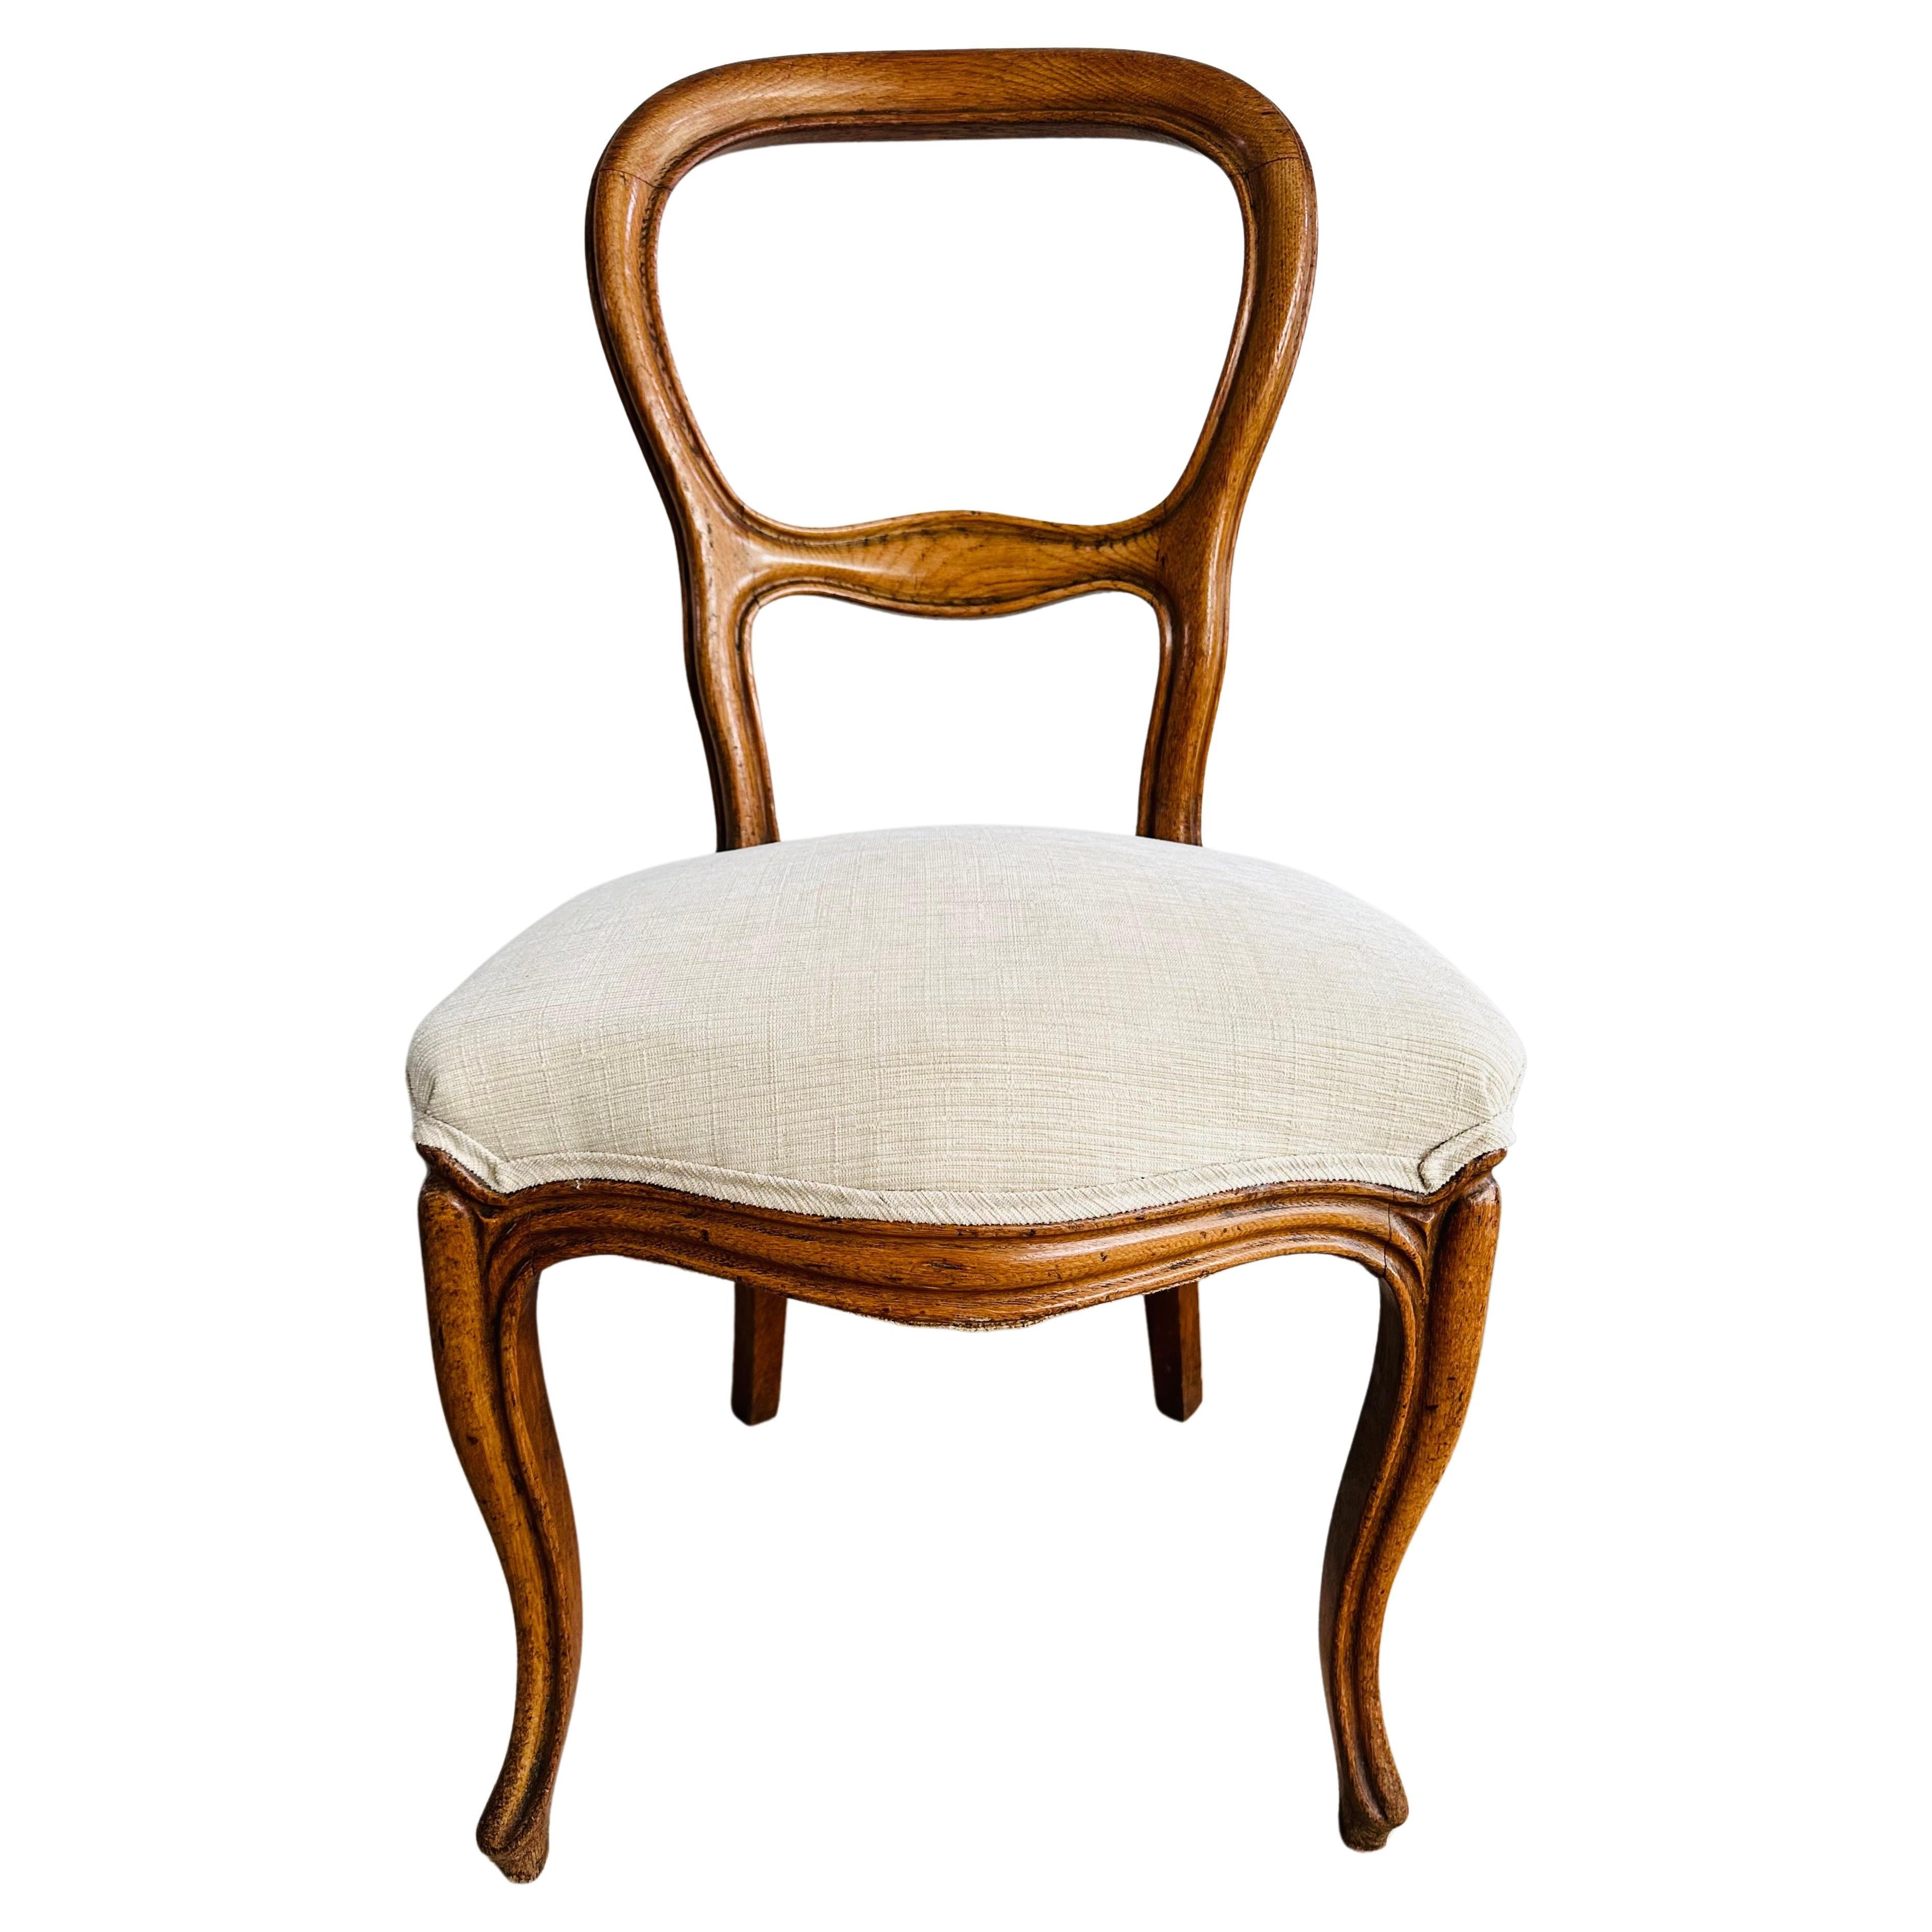 Circa 1900s English Oak Balloon Back Dining or Side Chair Newly Reupholstered  For Sale